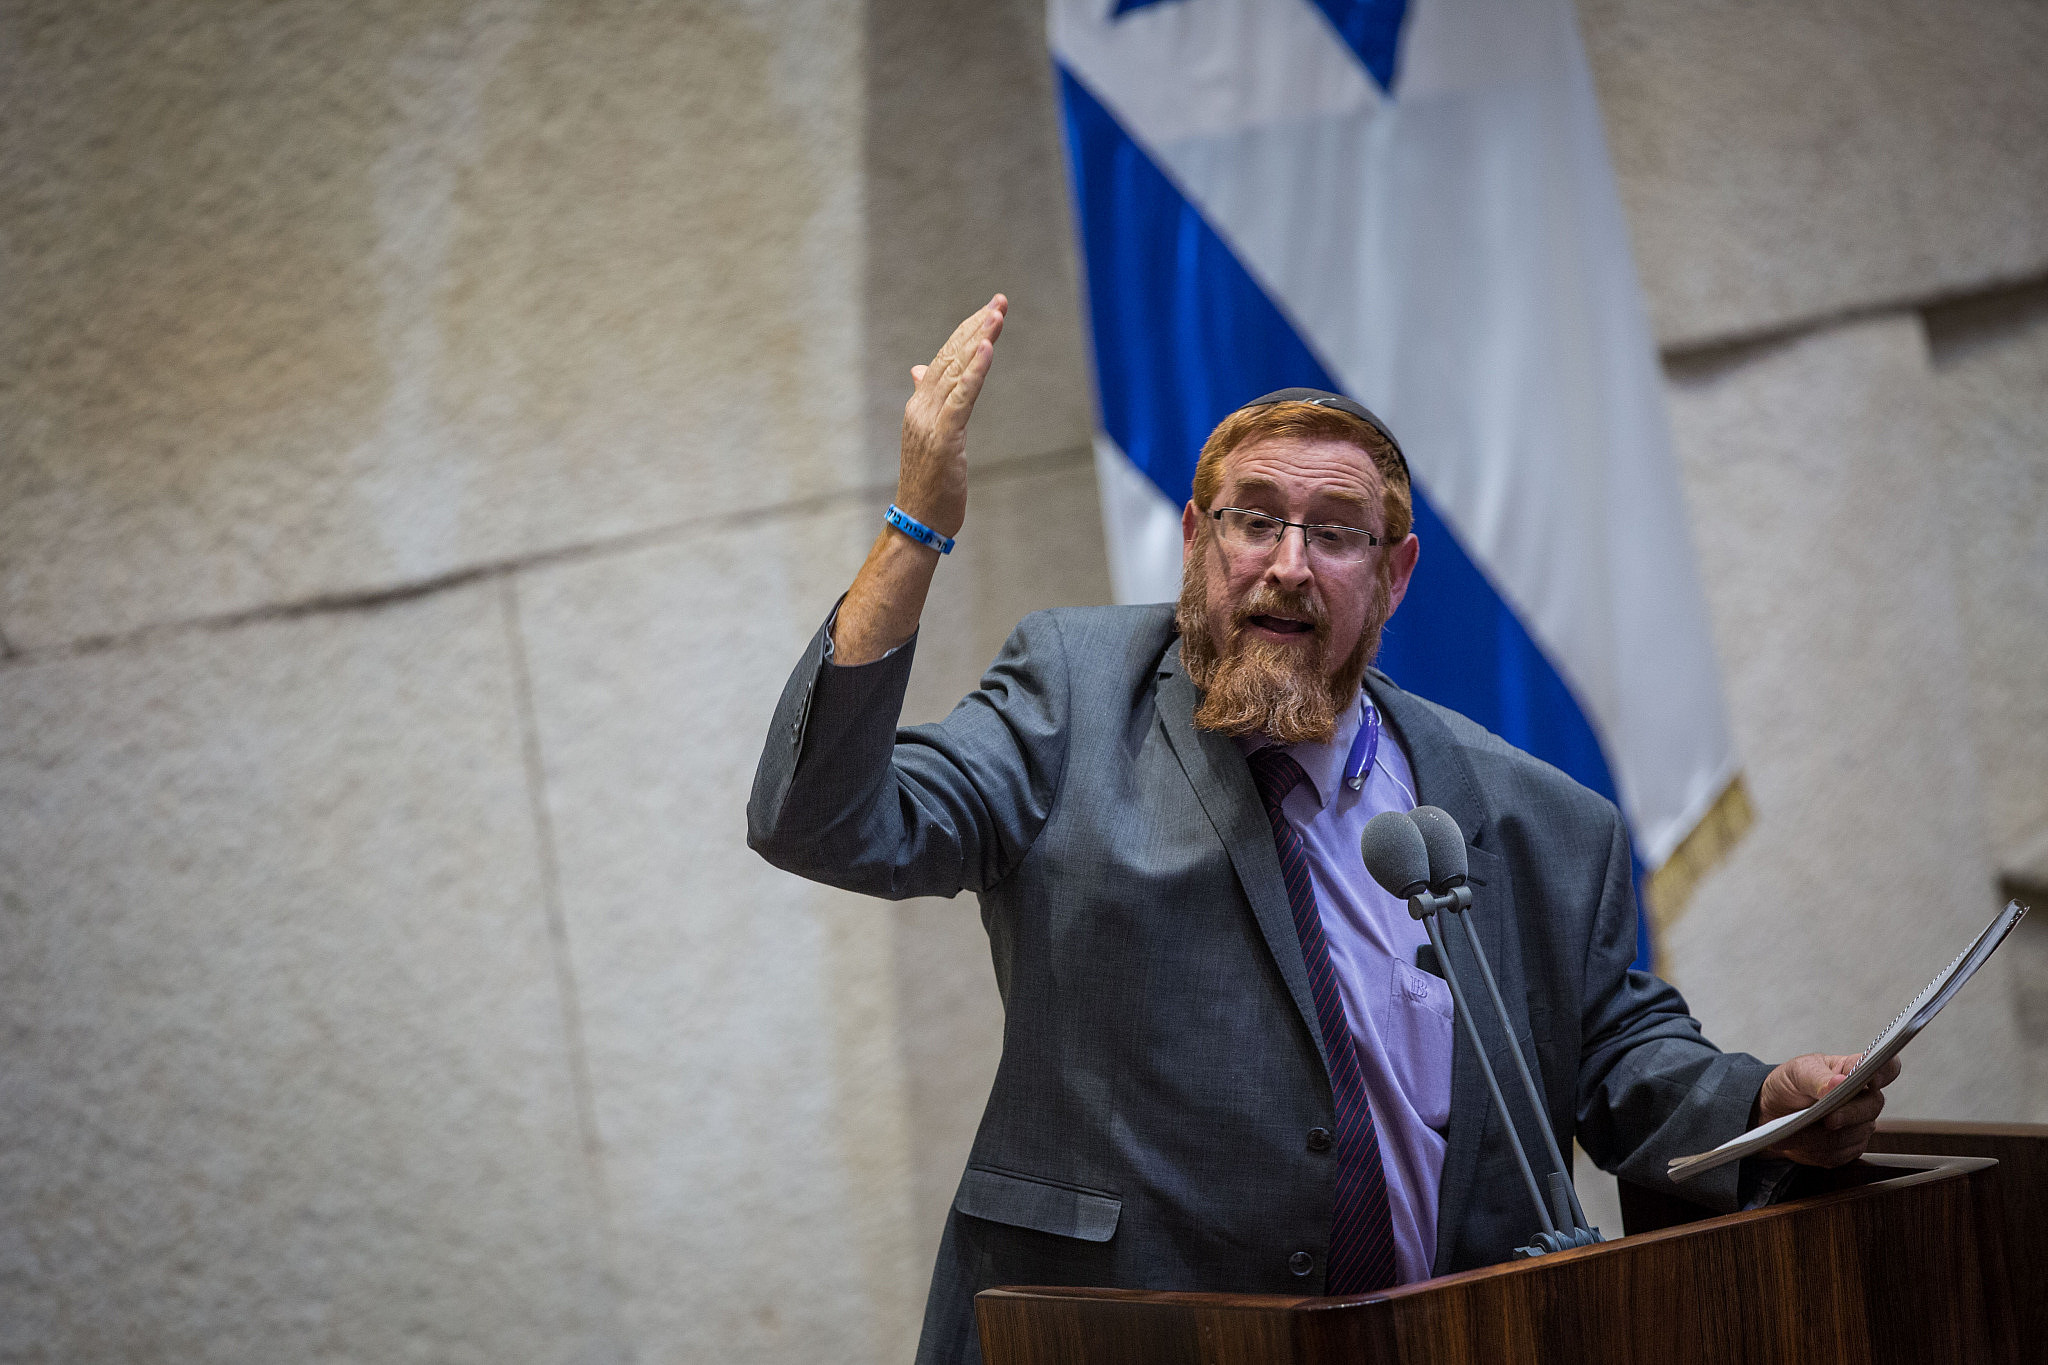 MK Yehuda Glick speaks during a vote on the so-called Regulation Bill, a bill that seeks to legitimize illegal West Bank outposts, in the Knesset, December 7, 2016. (Hadas Parush/Flash90)